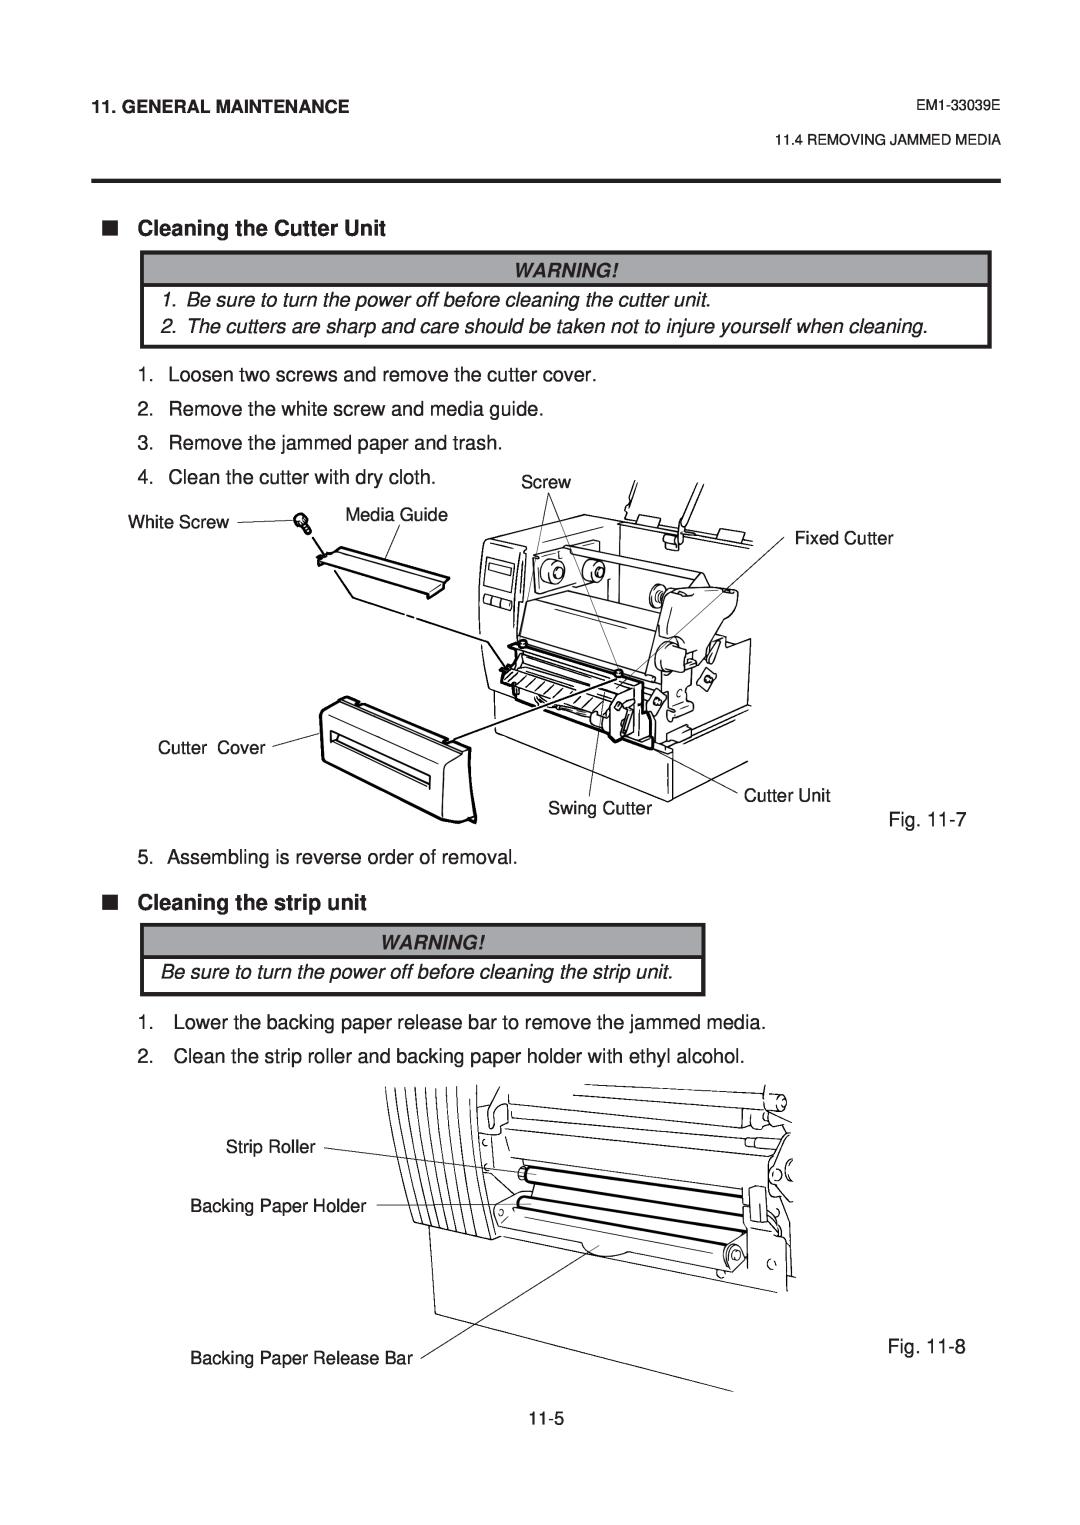 Toshiba EM1-33039EE, B-870 SERIES owner manual Cleaning the Cutter Unit, Cleaning the strip unit 